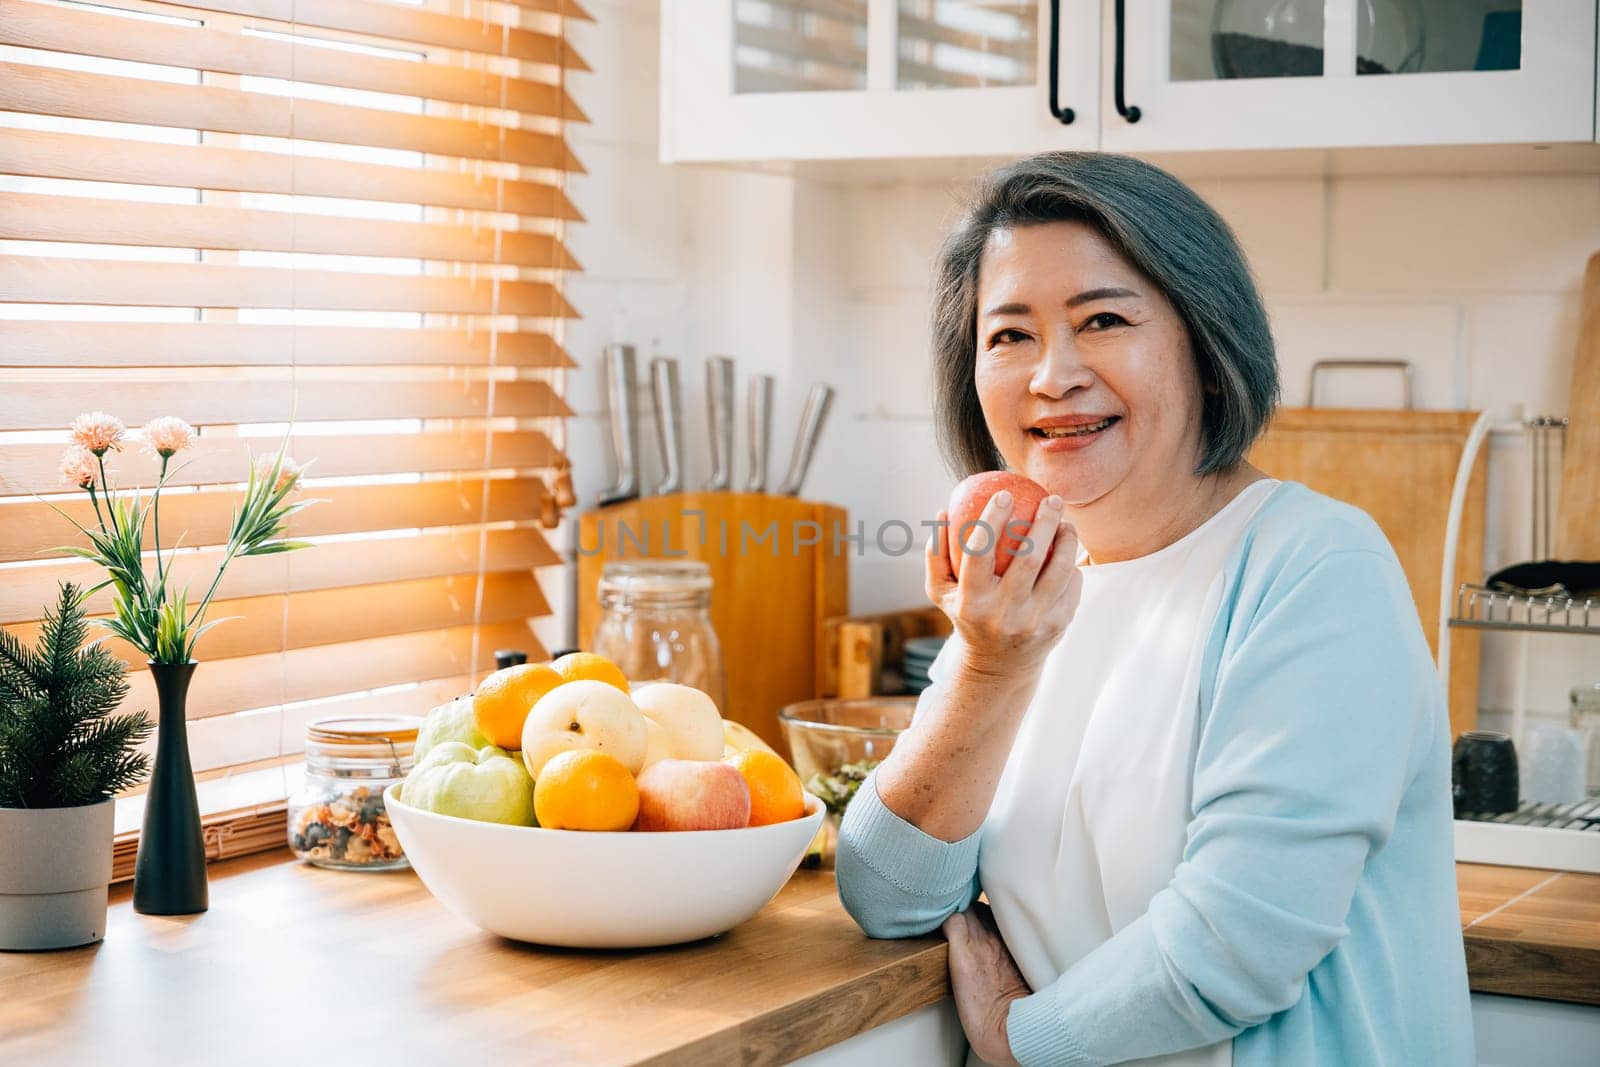 In the kitchen, a happy old woman, a grandmother, enjoys cooking and preparing healthy vegan food. She selects a fresh apple to eat, embodying the diet concept. A portrait of happiness and wellness. by Sorapop